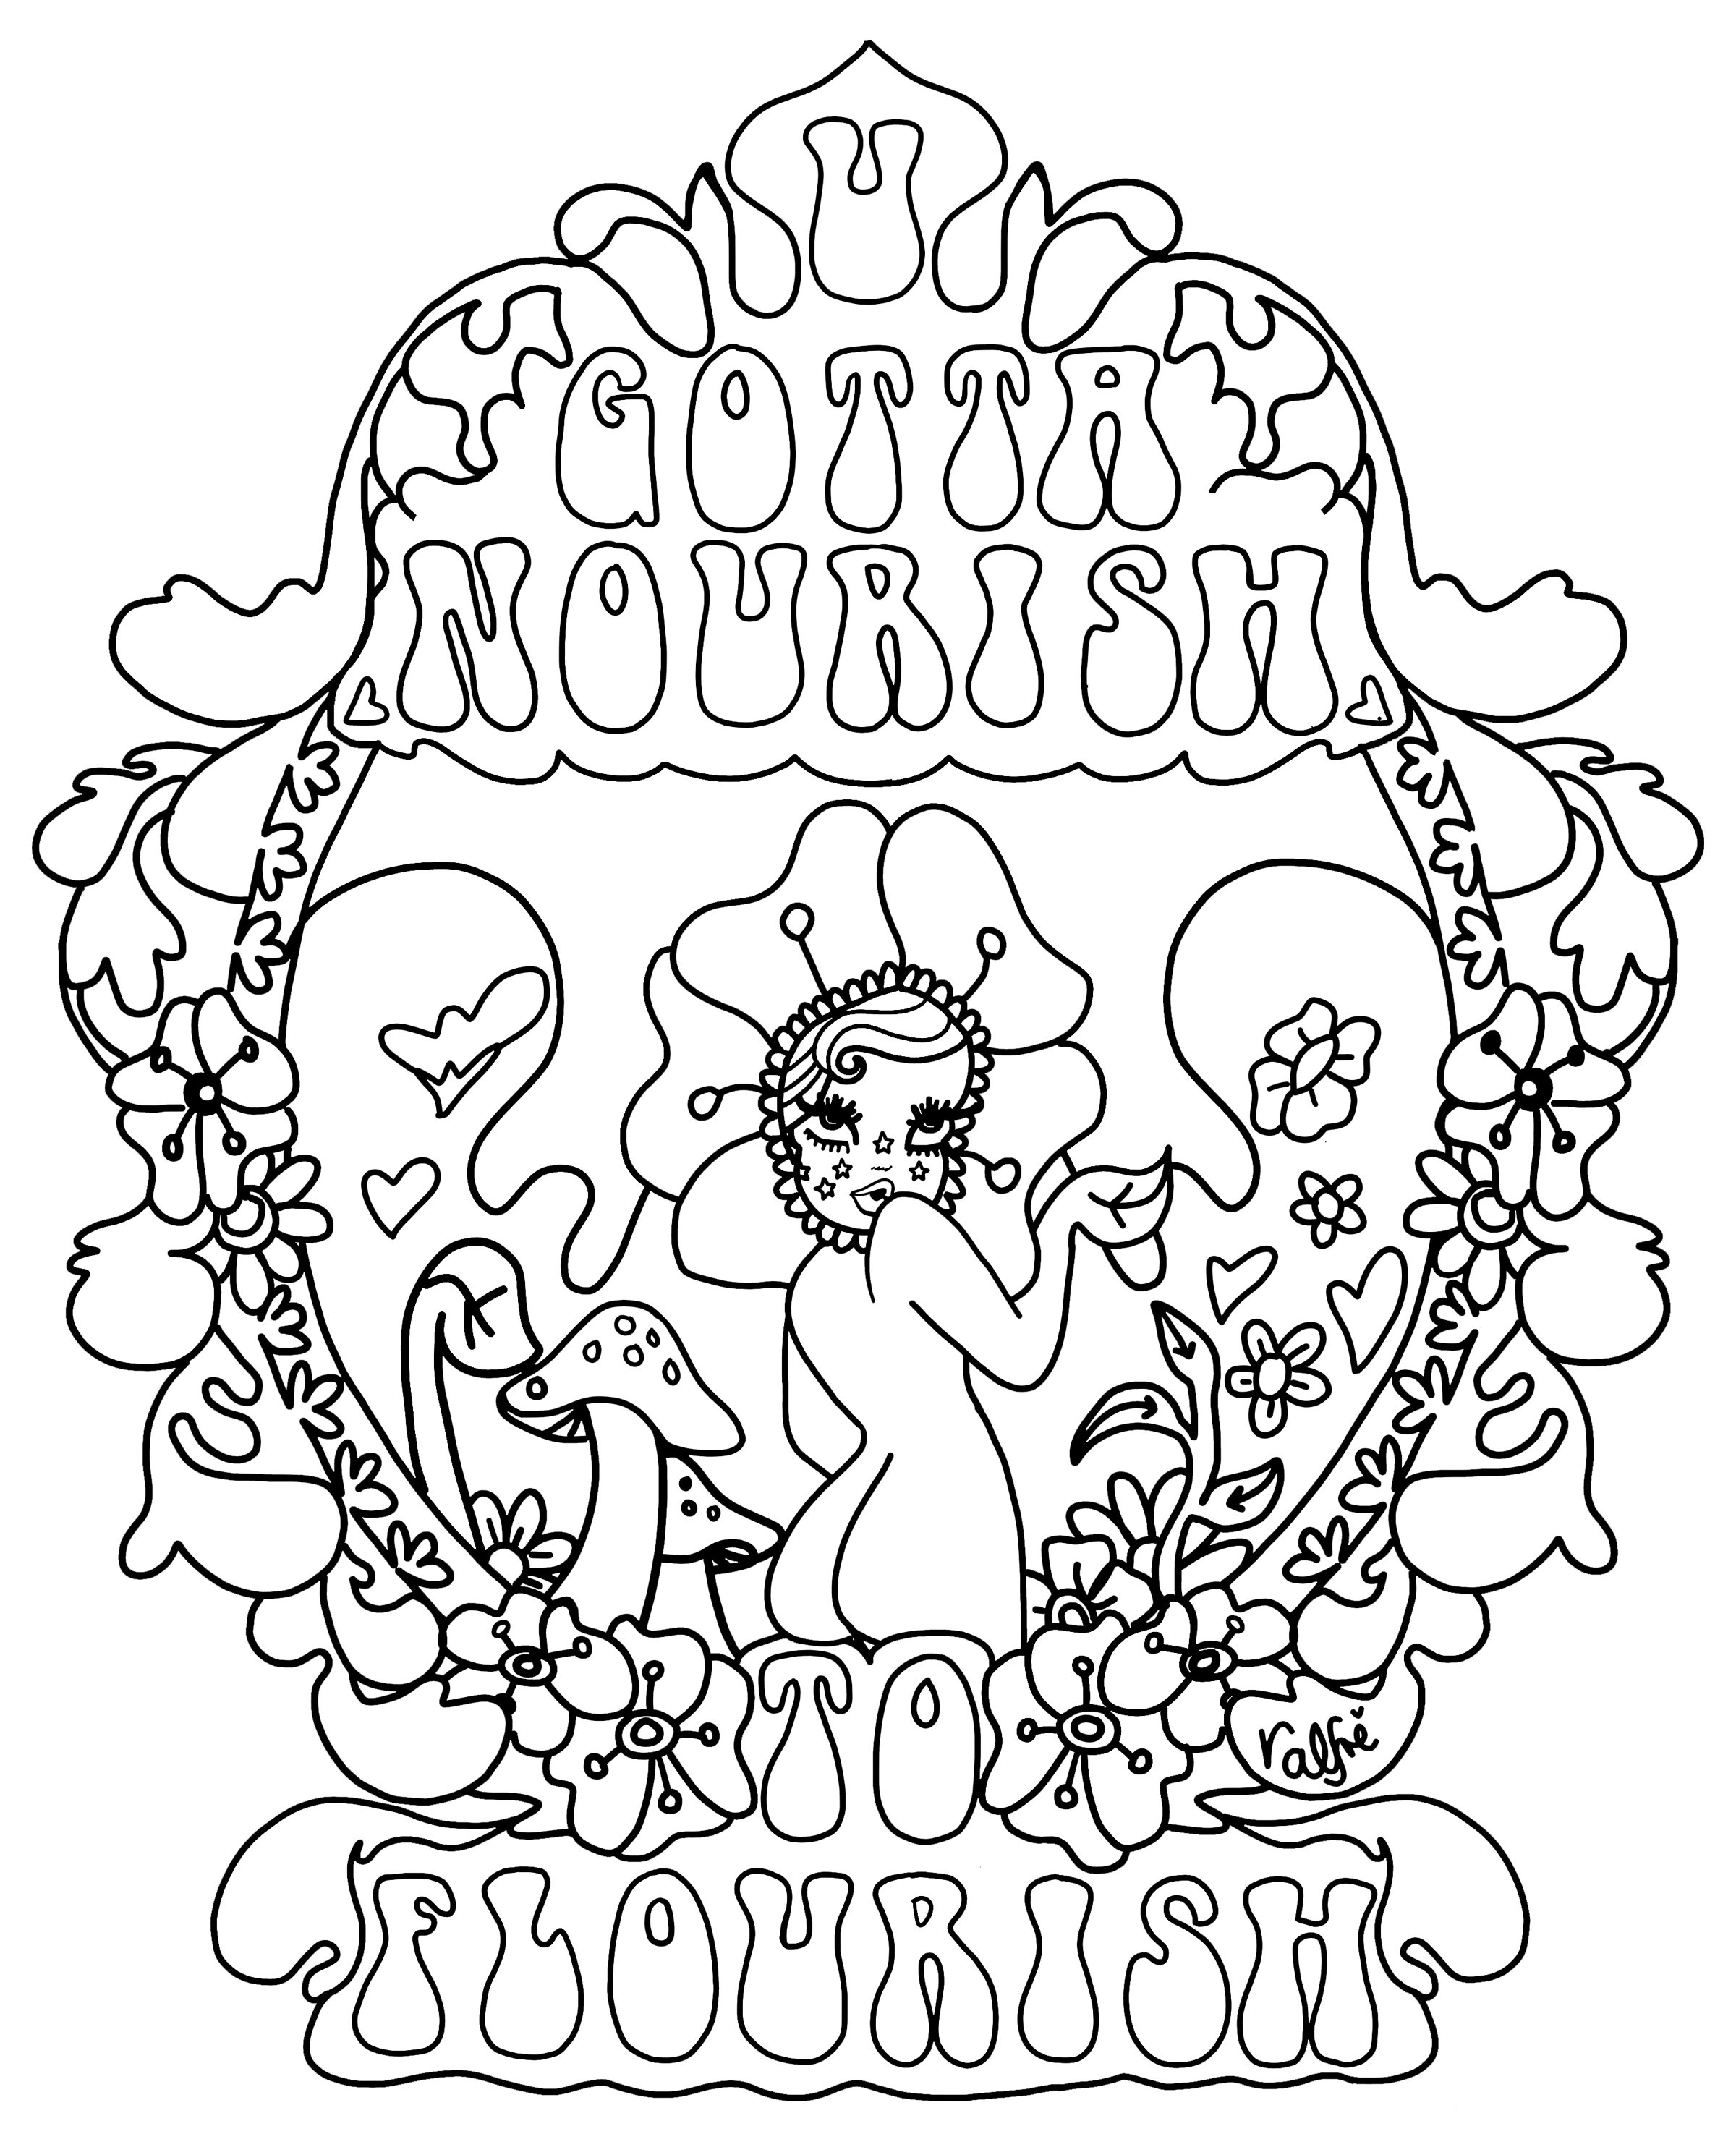 Weed High Coloring Pages